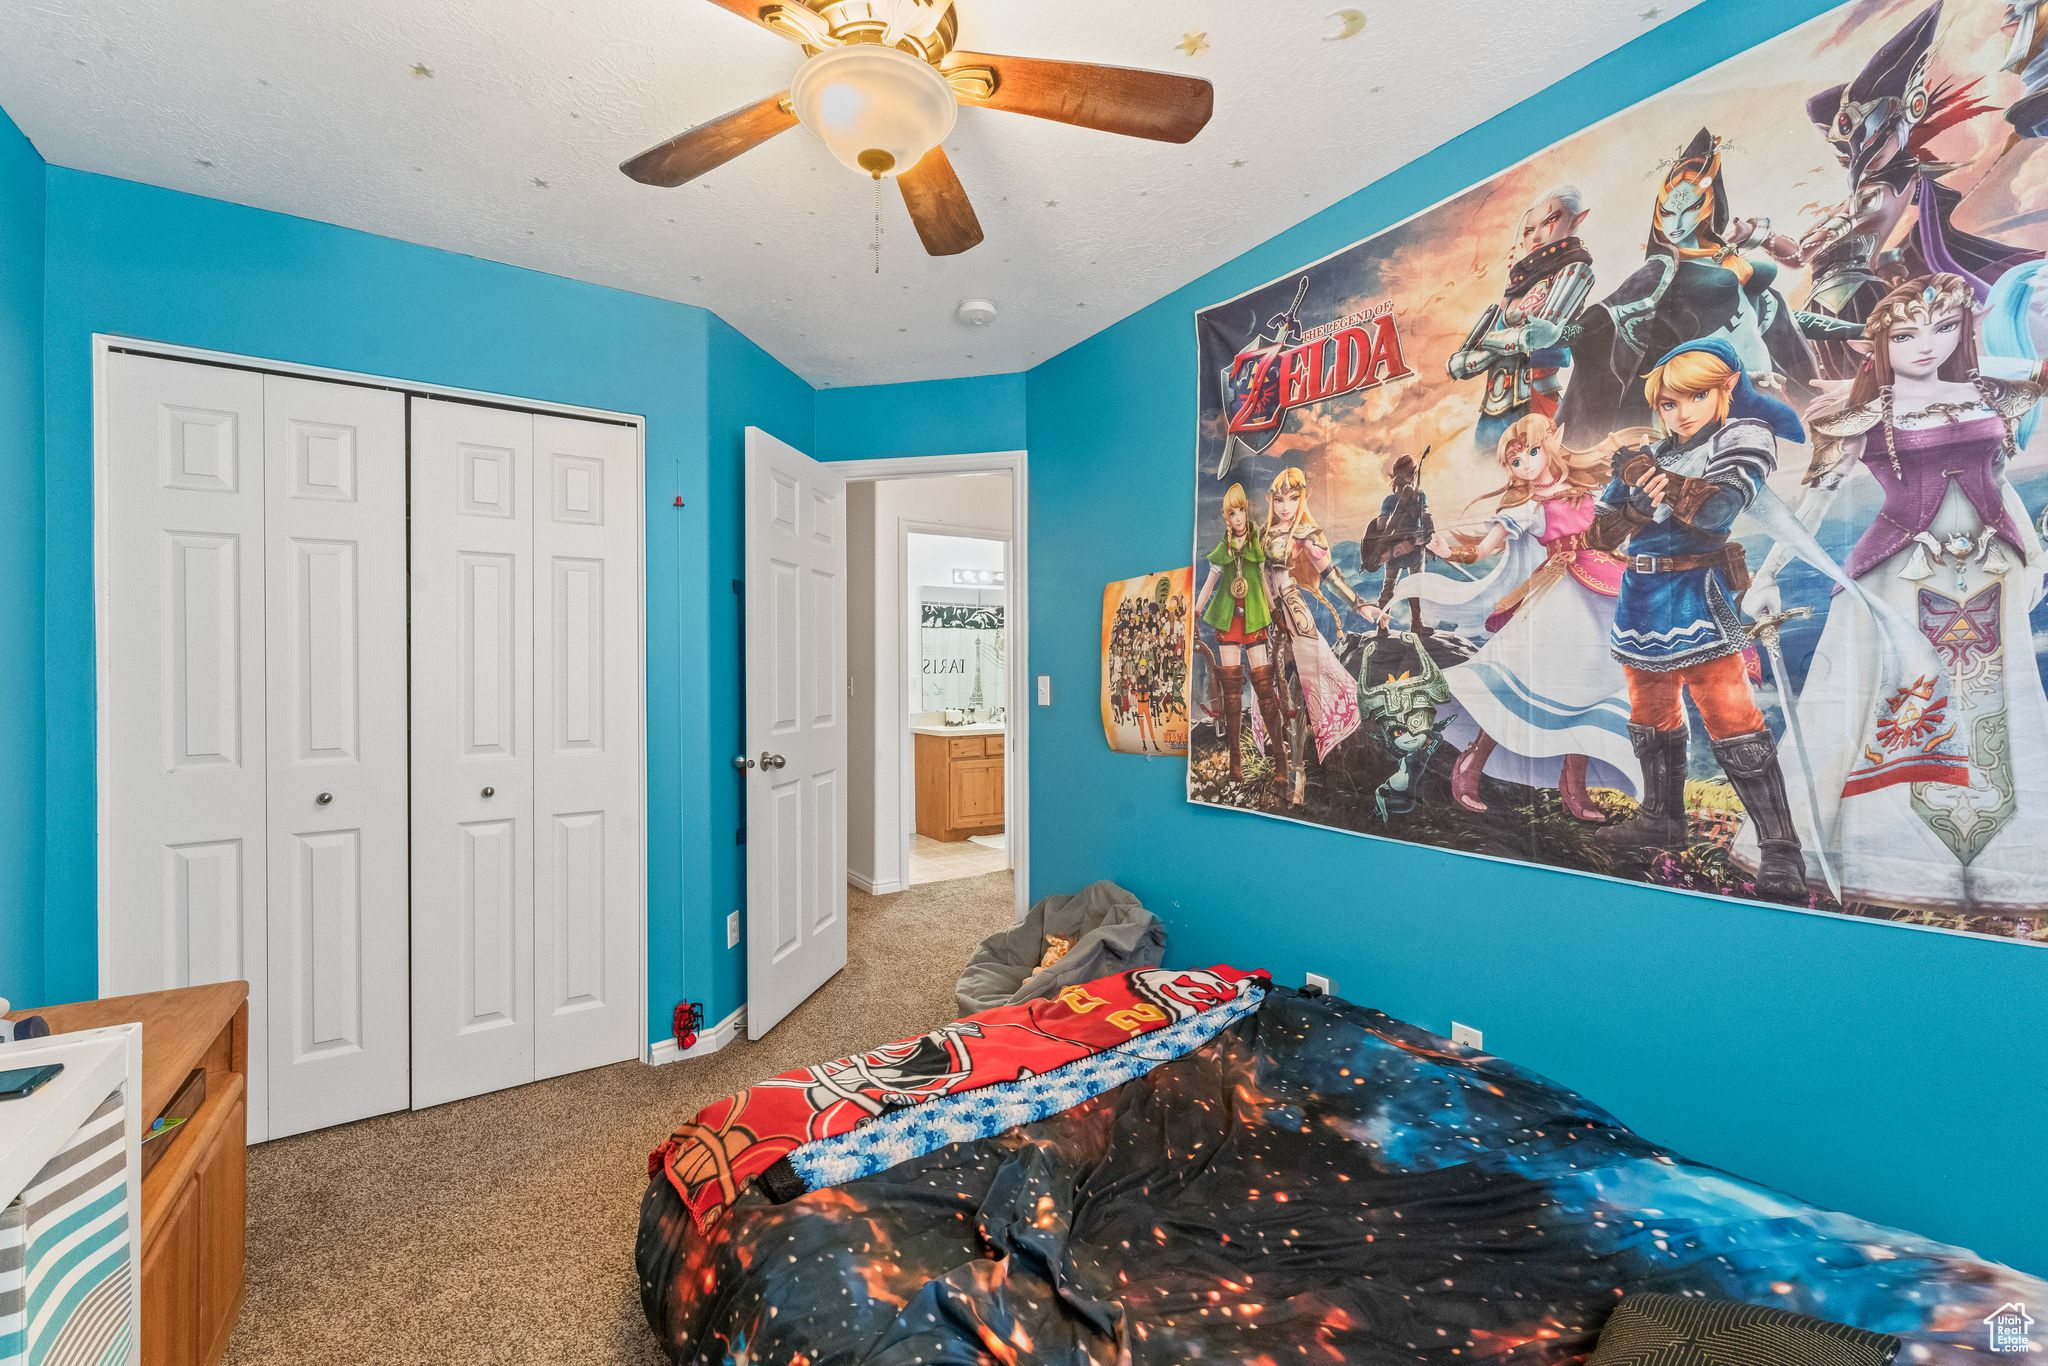 Carpeted bedroom featuring a closet and ceiling fan